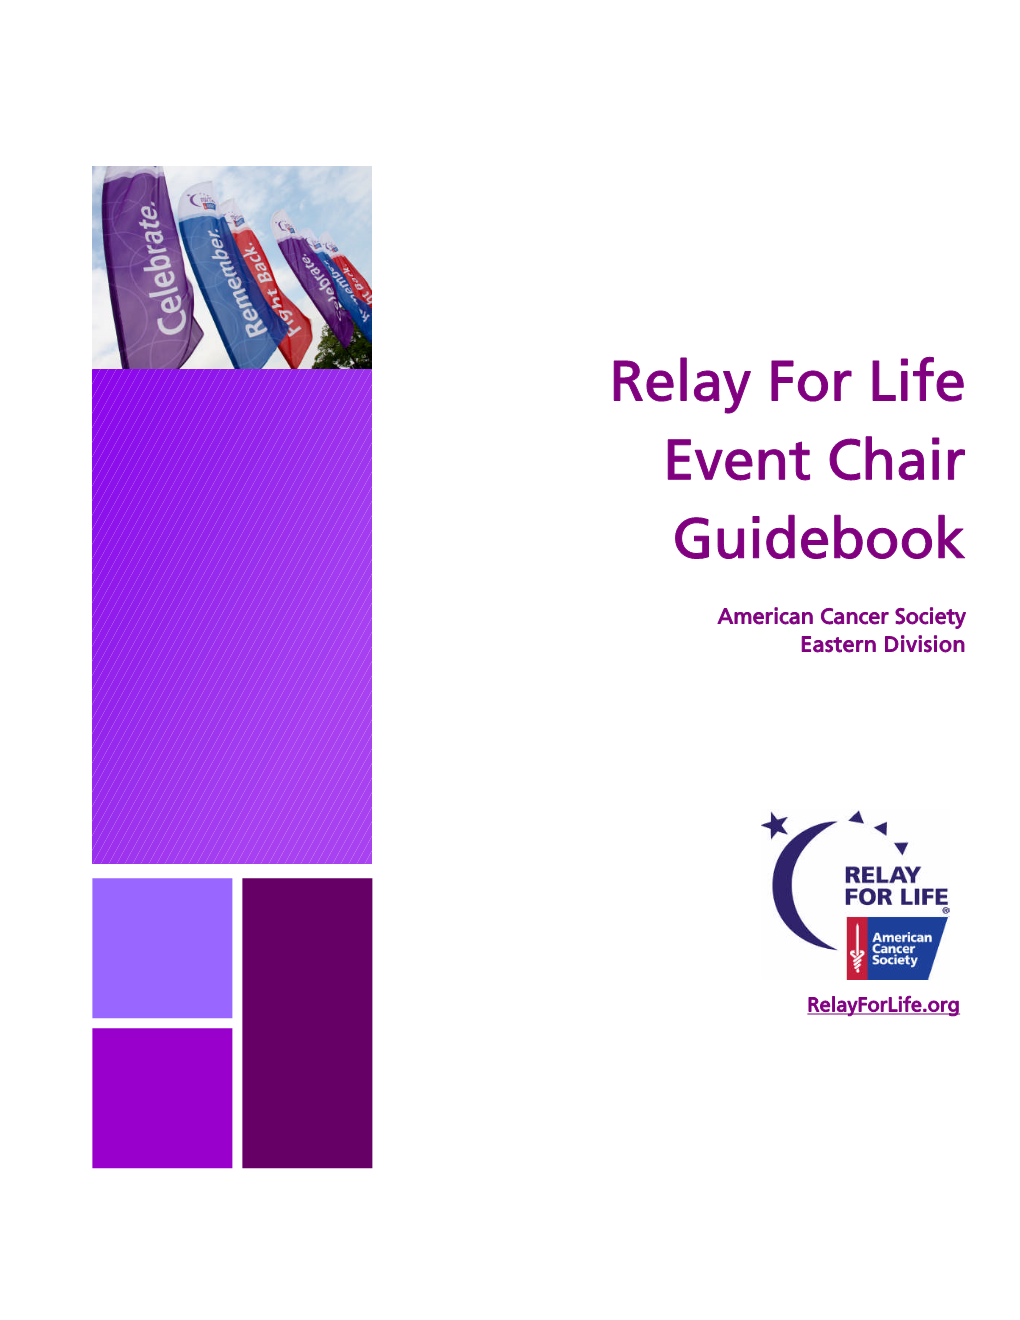 Relay for Life Event Chair Guidebook